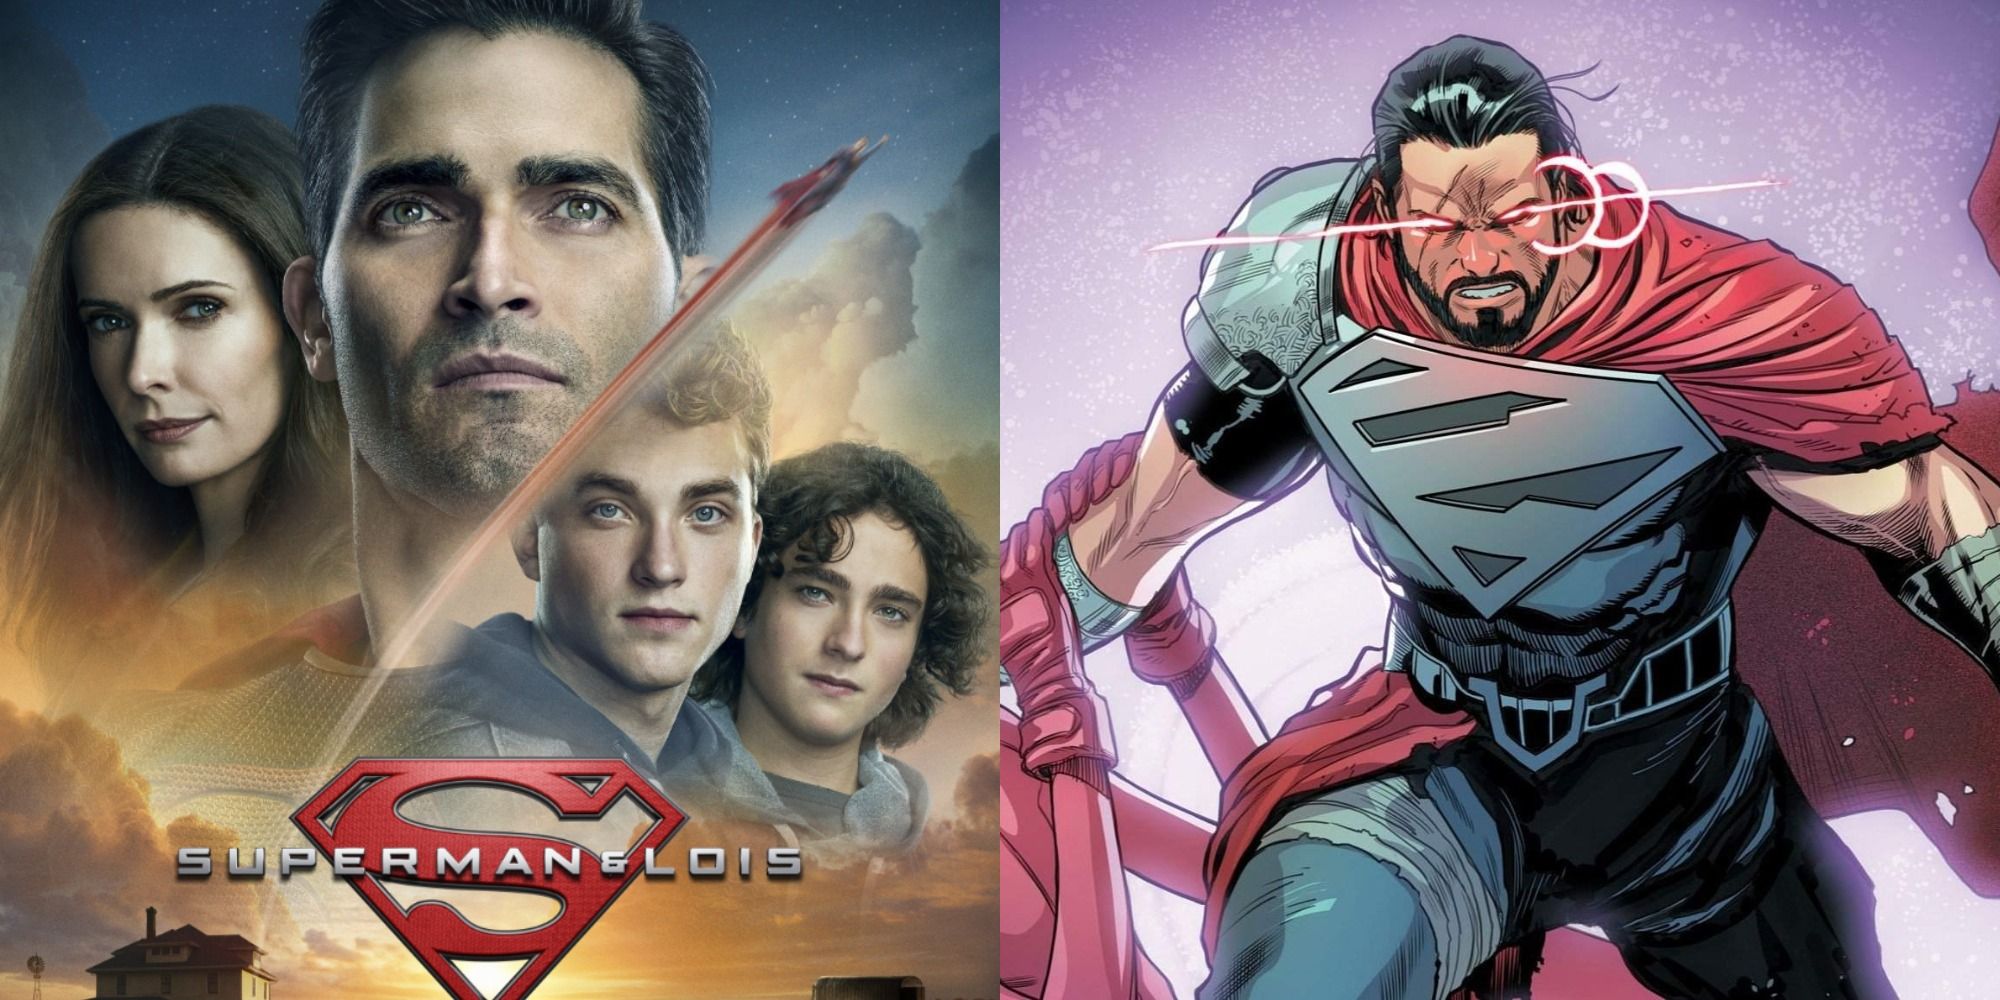 Split image showing a poster for Superman & Lois and General Zod in the comics